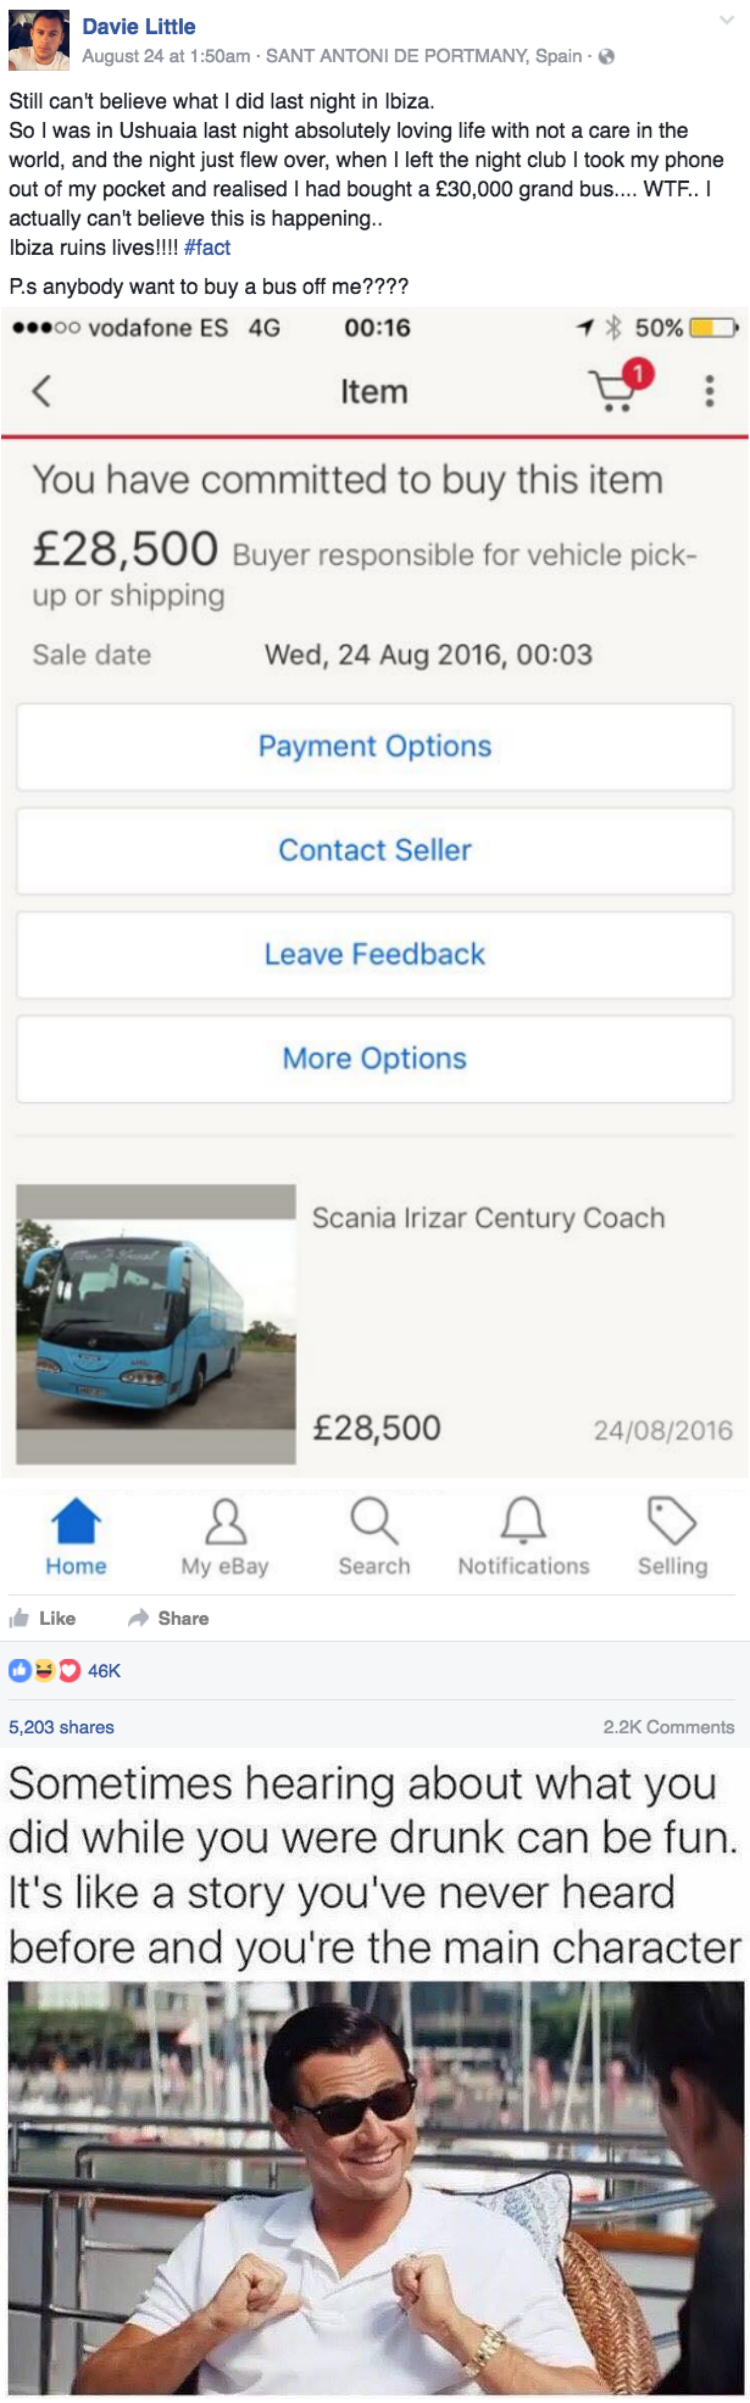 funny fail image guy bought bus online after partying in Ibiza